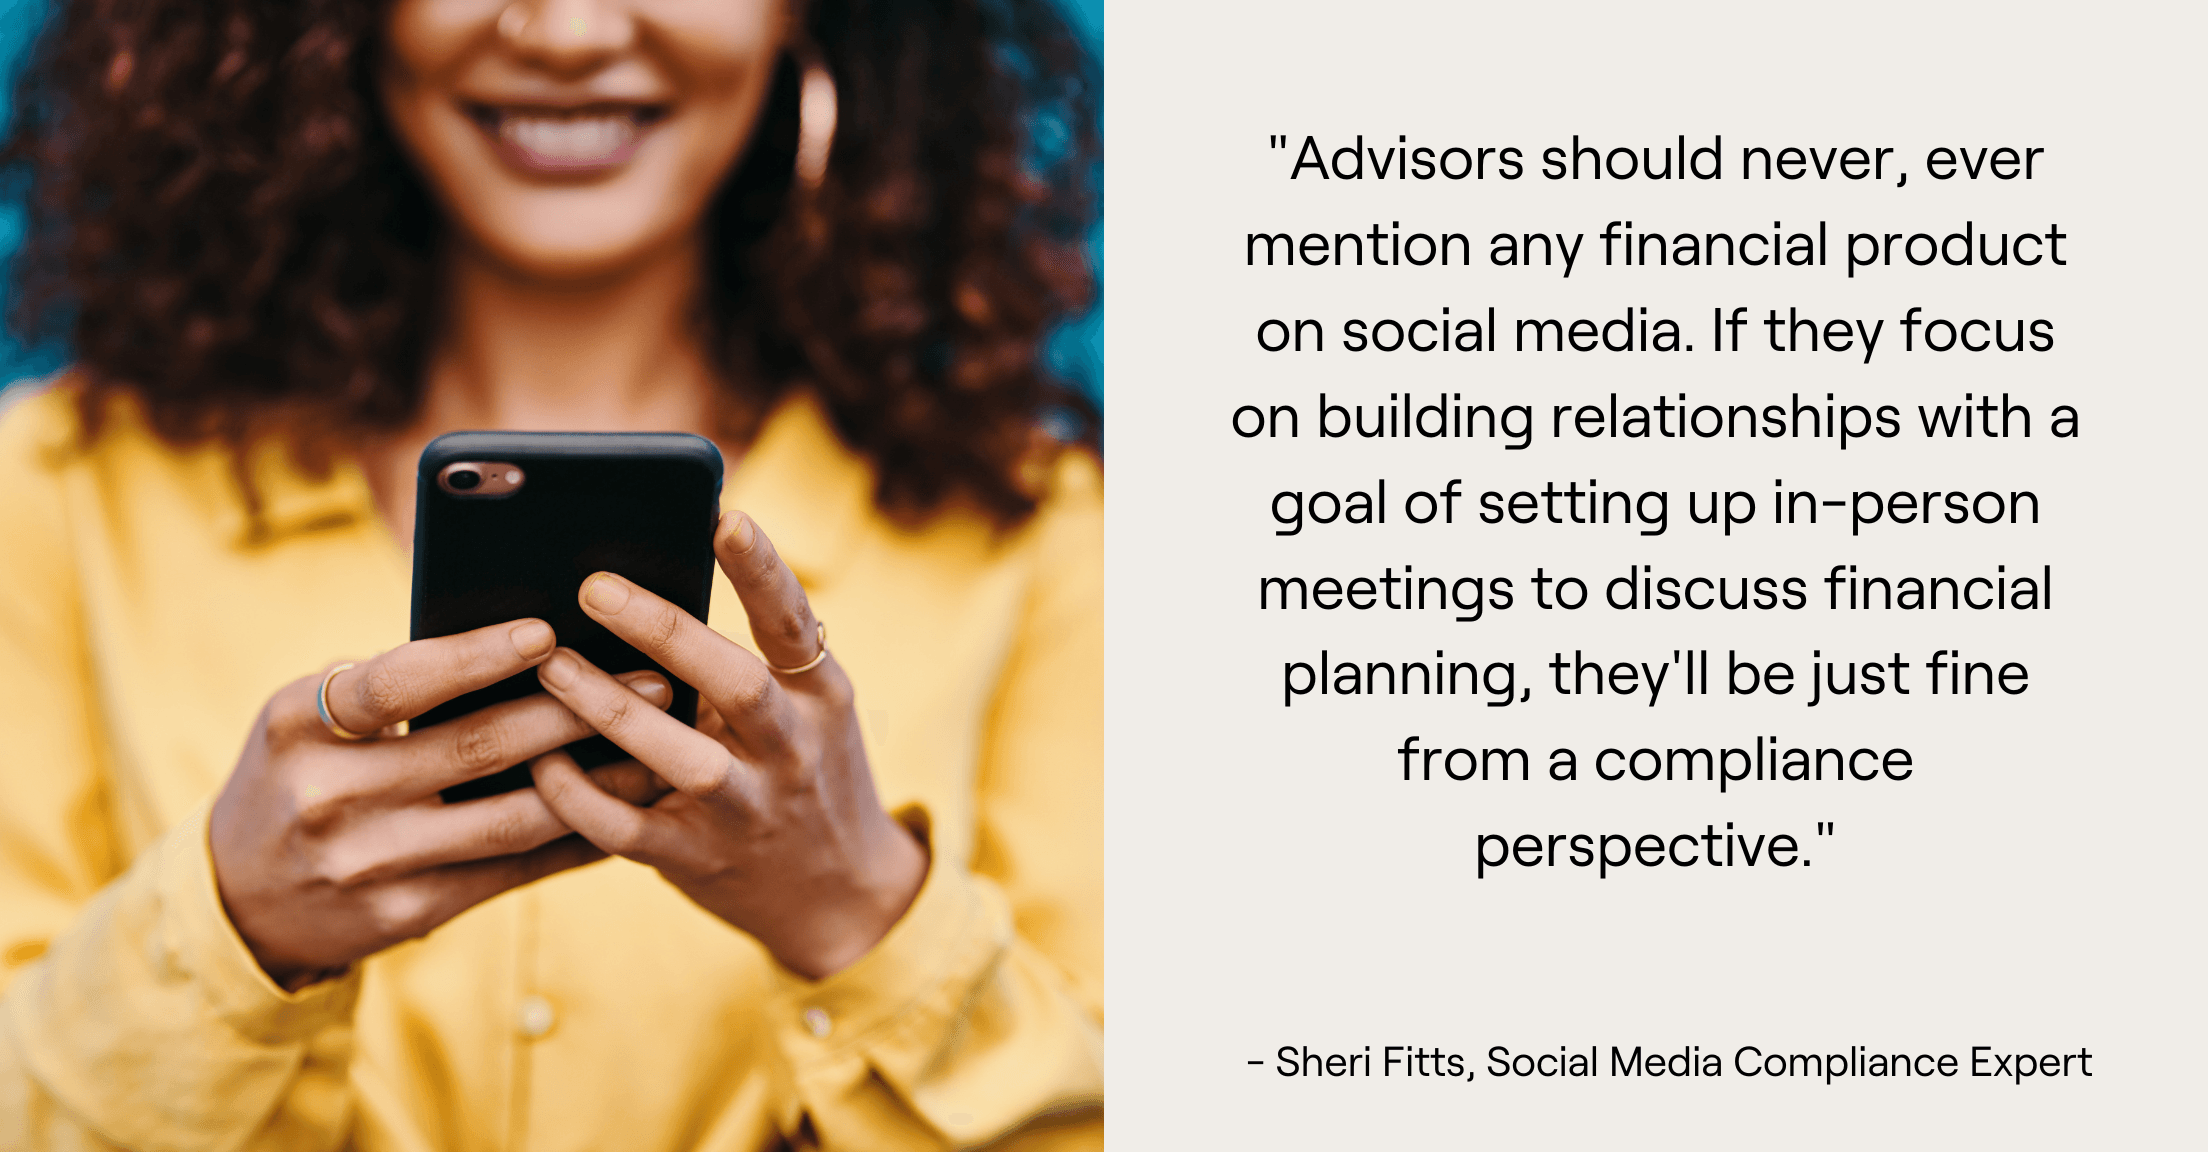 Woman on phone and Sheri Fitts' quote "Advisors should never, ever mention any financial product on social media. If they focus on building relationships with a goal of setting up in-person meetings to discuss financial planning, they'll be just fine from a compliance perspective."